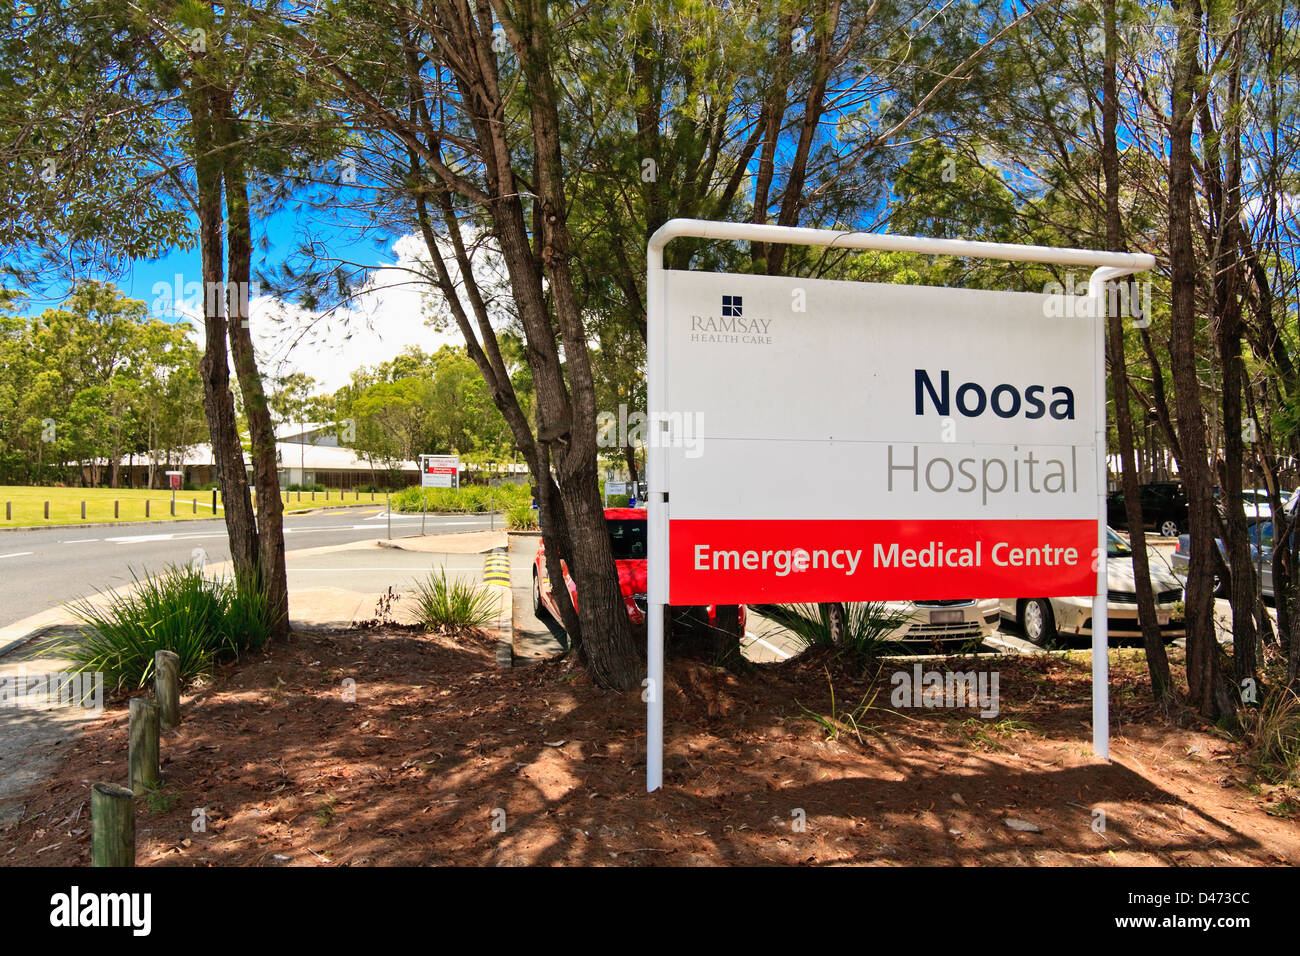 Signage showing The entrance to the Noosa Hospital Emergency Medical Centre location Noosa Queensland Australia Stock Photo